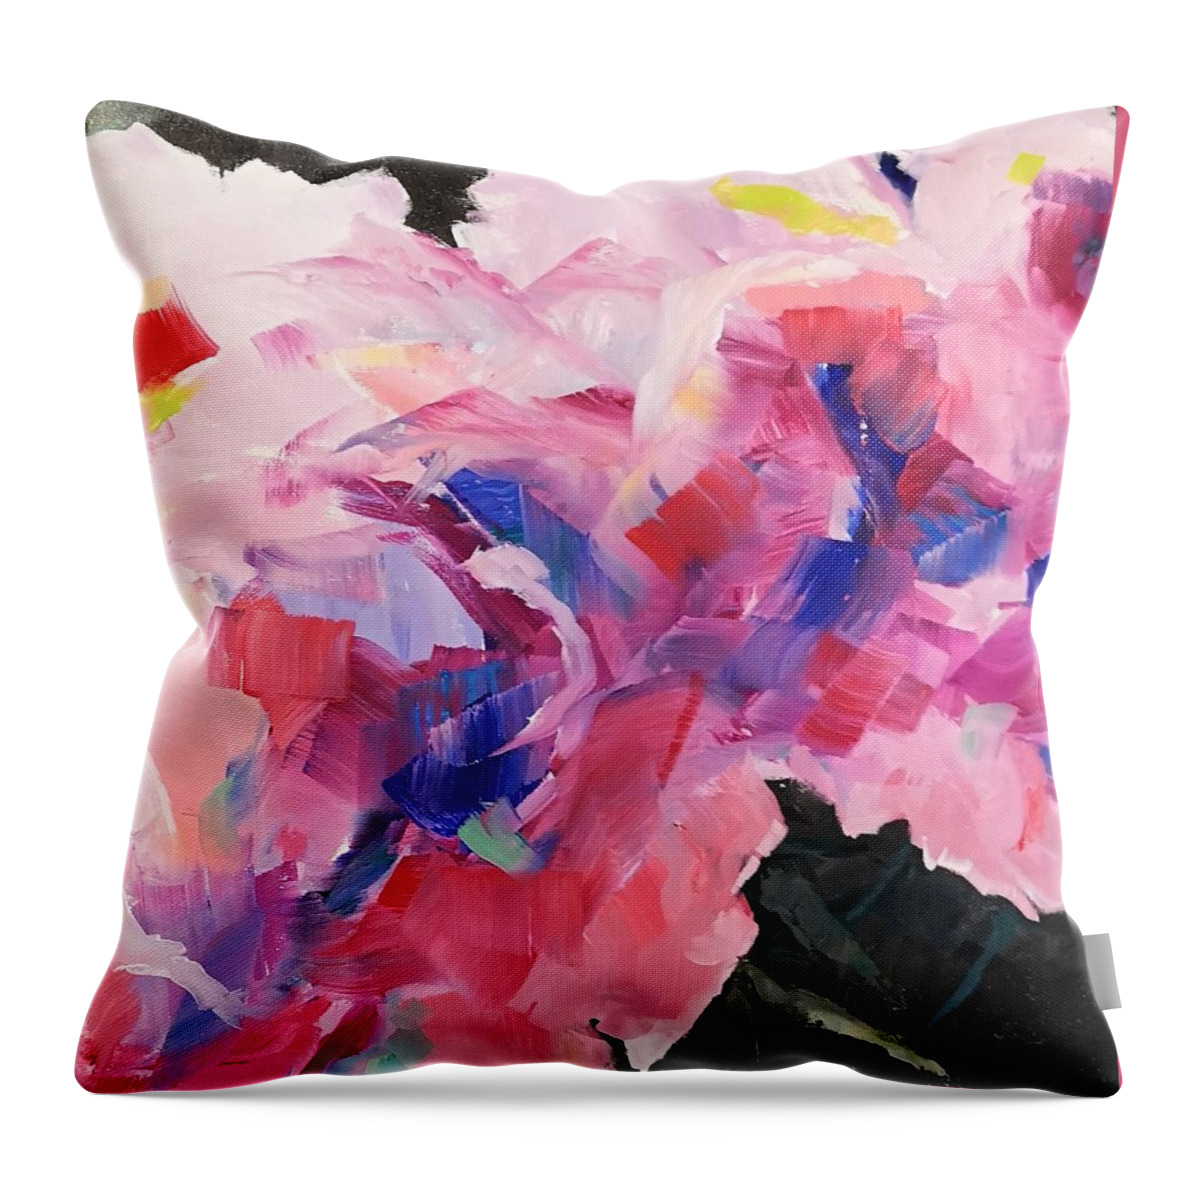 Flowers Throw Pillow featuring the painting Pink Flowers by Sheila Romard